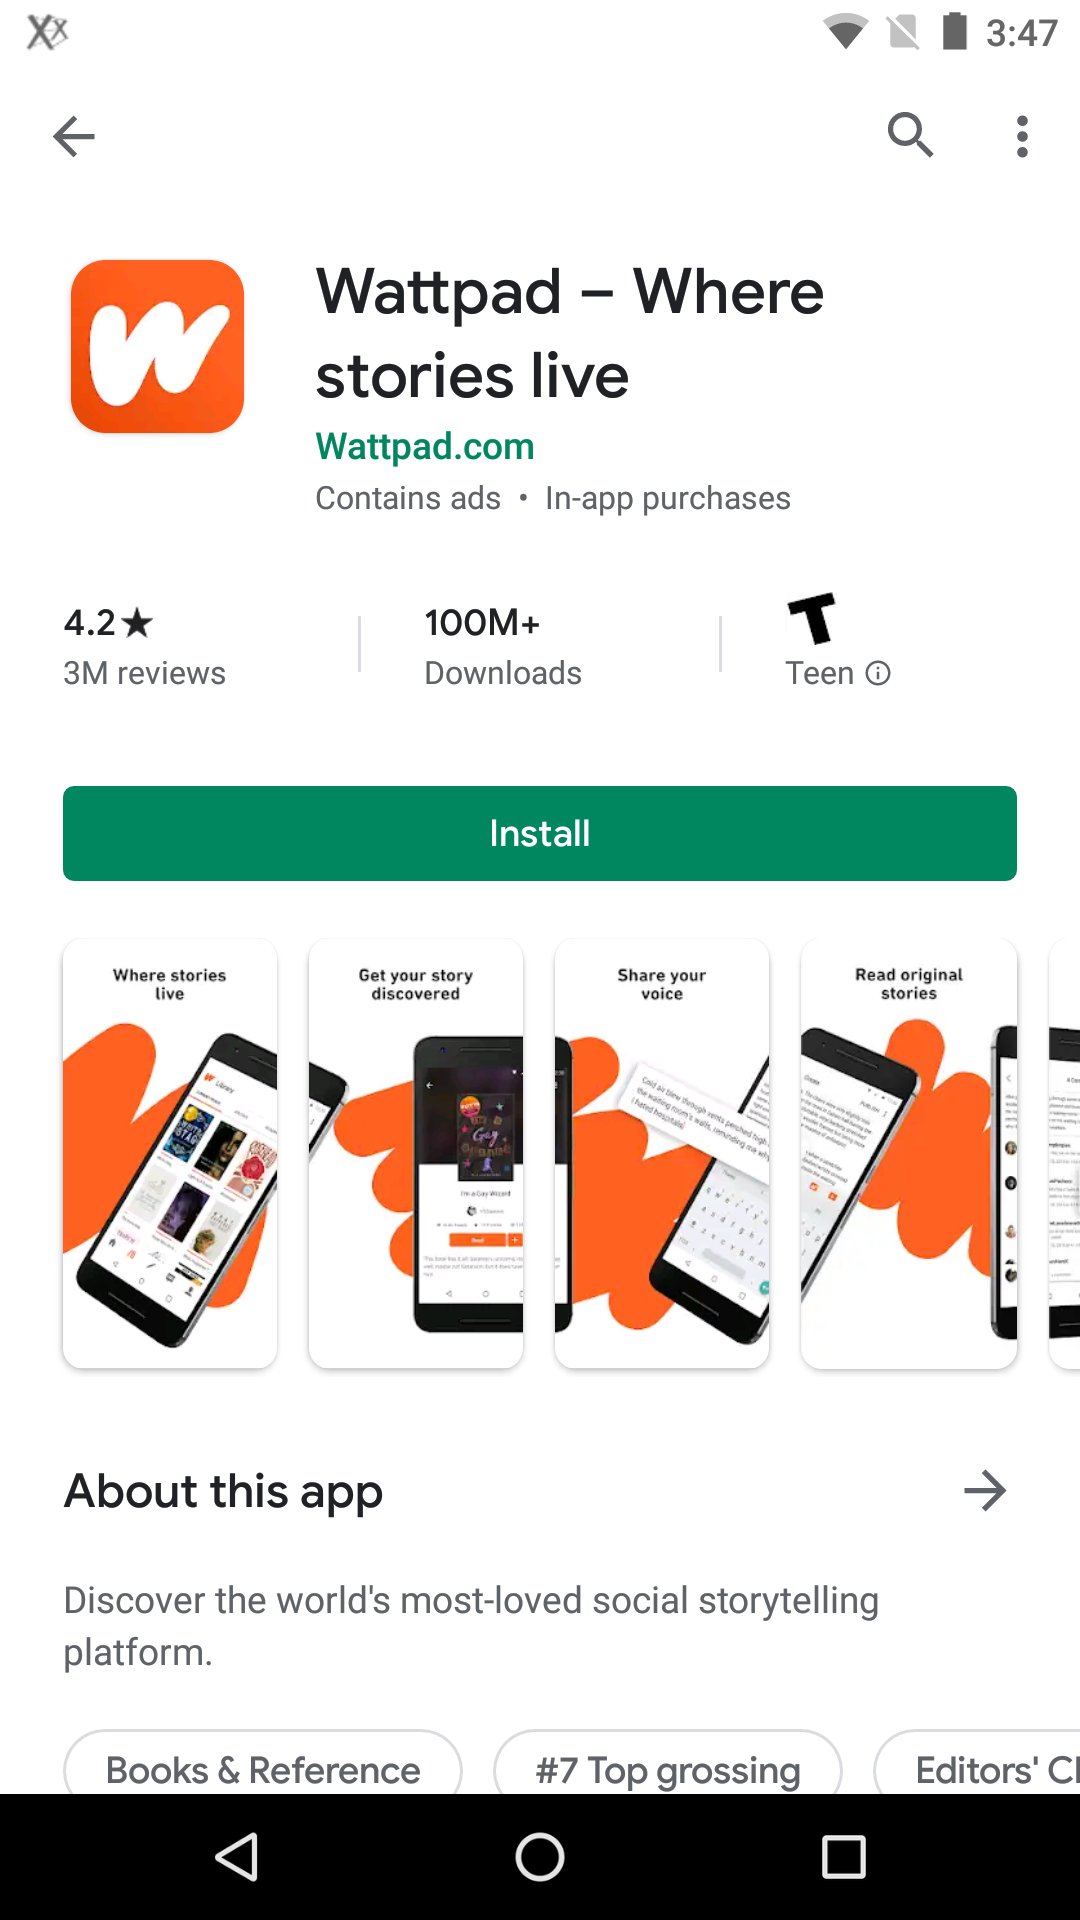 google play store screenshots showing the device model with the app in use